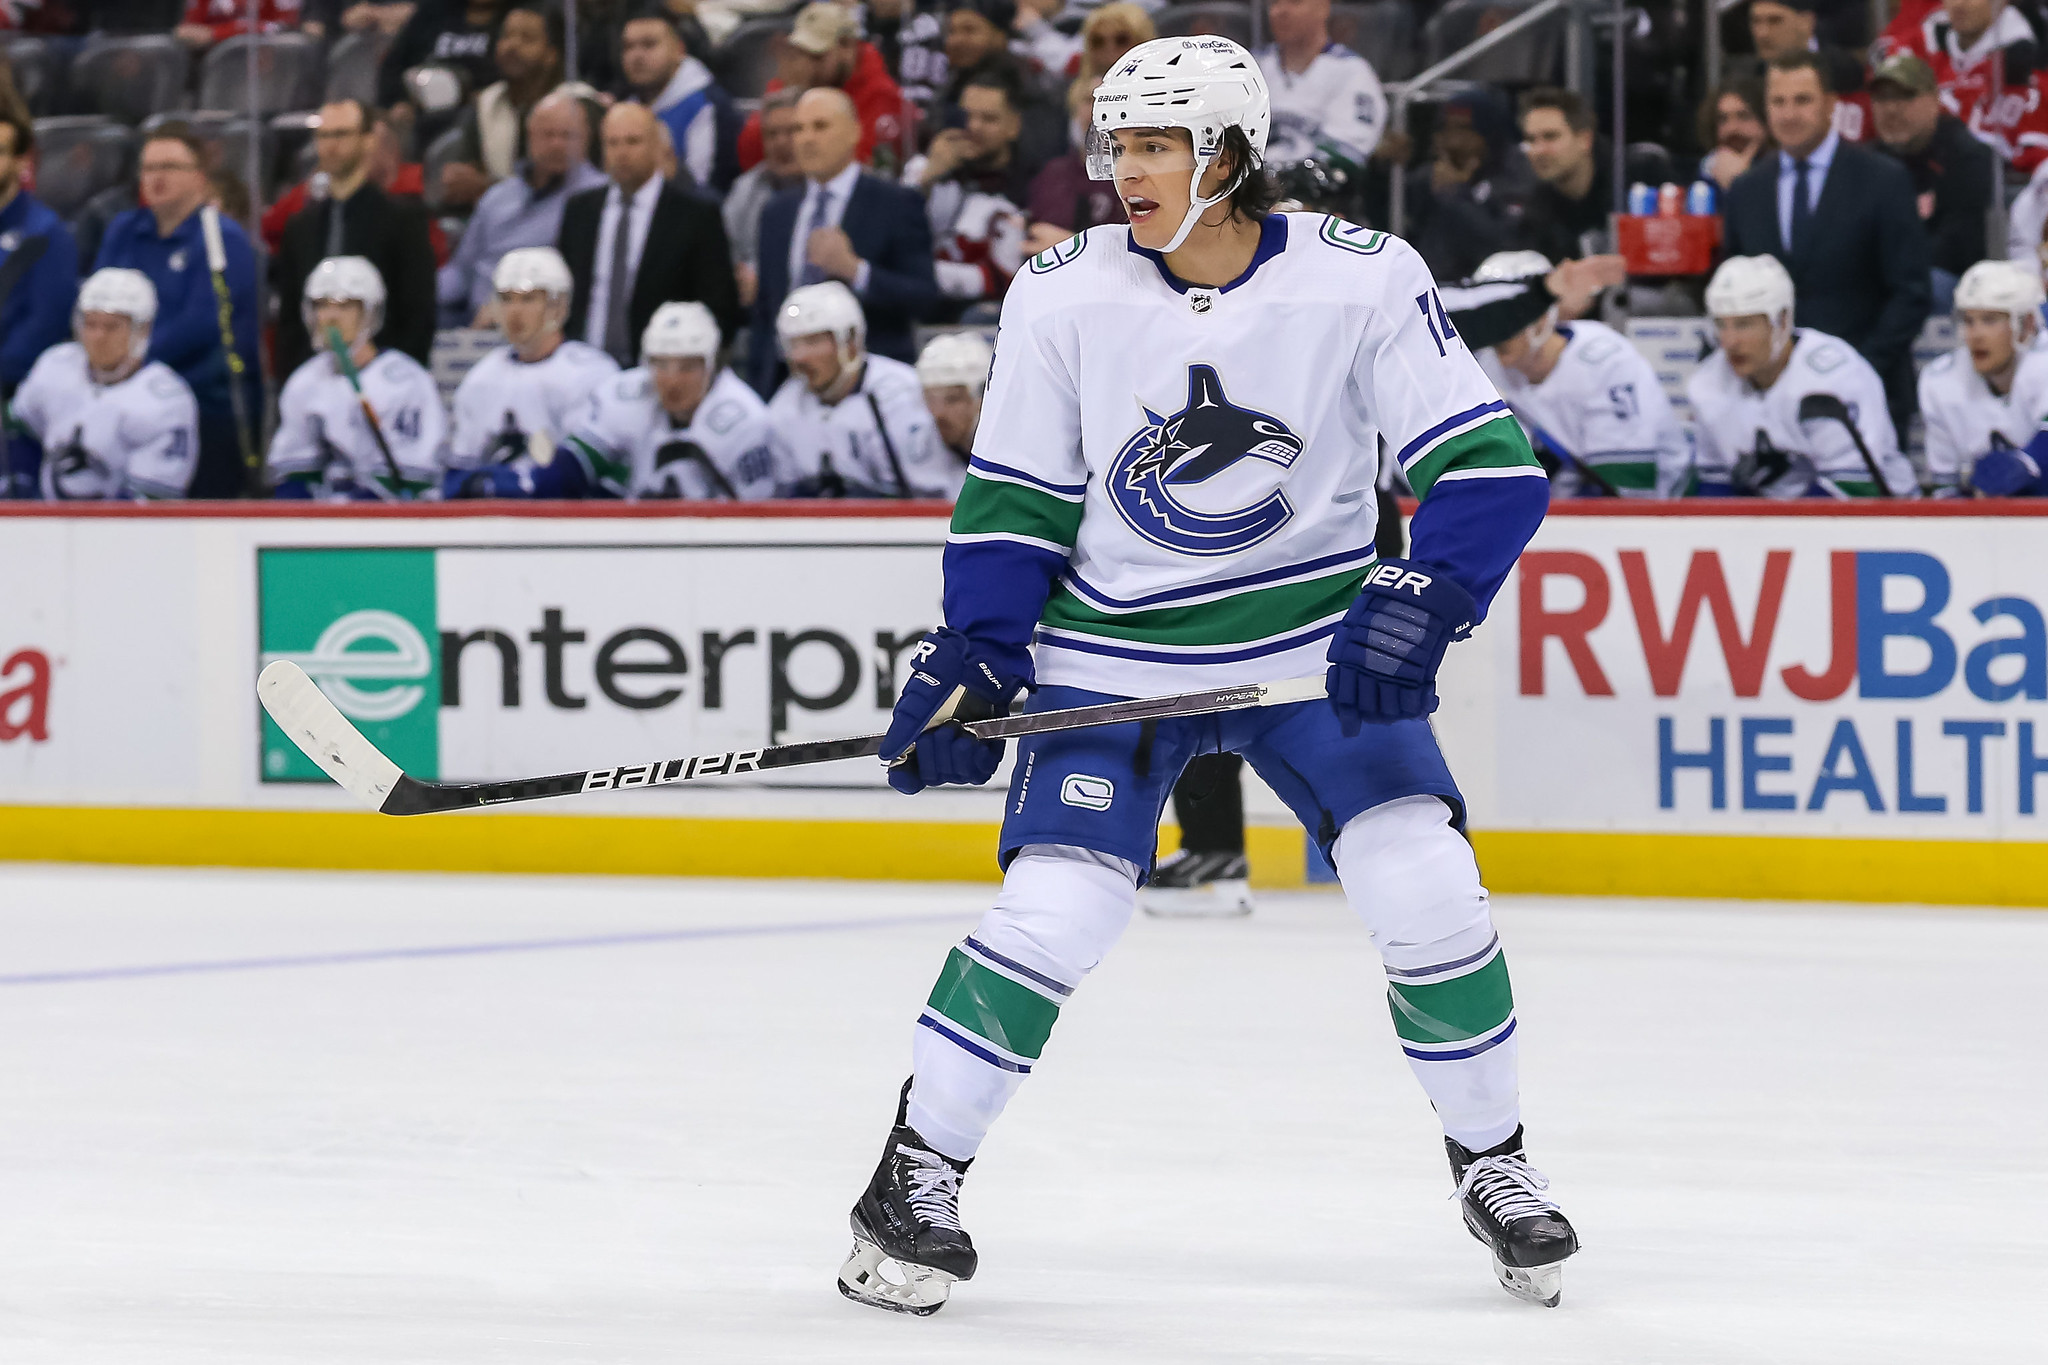 NHL Trade and Free Agency Tracker: Ethan Bear could be a steal for